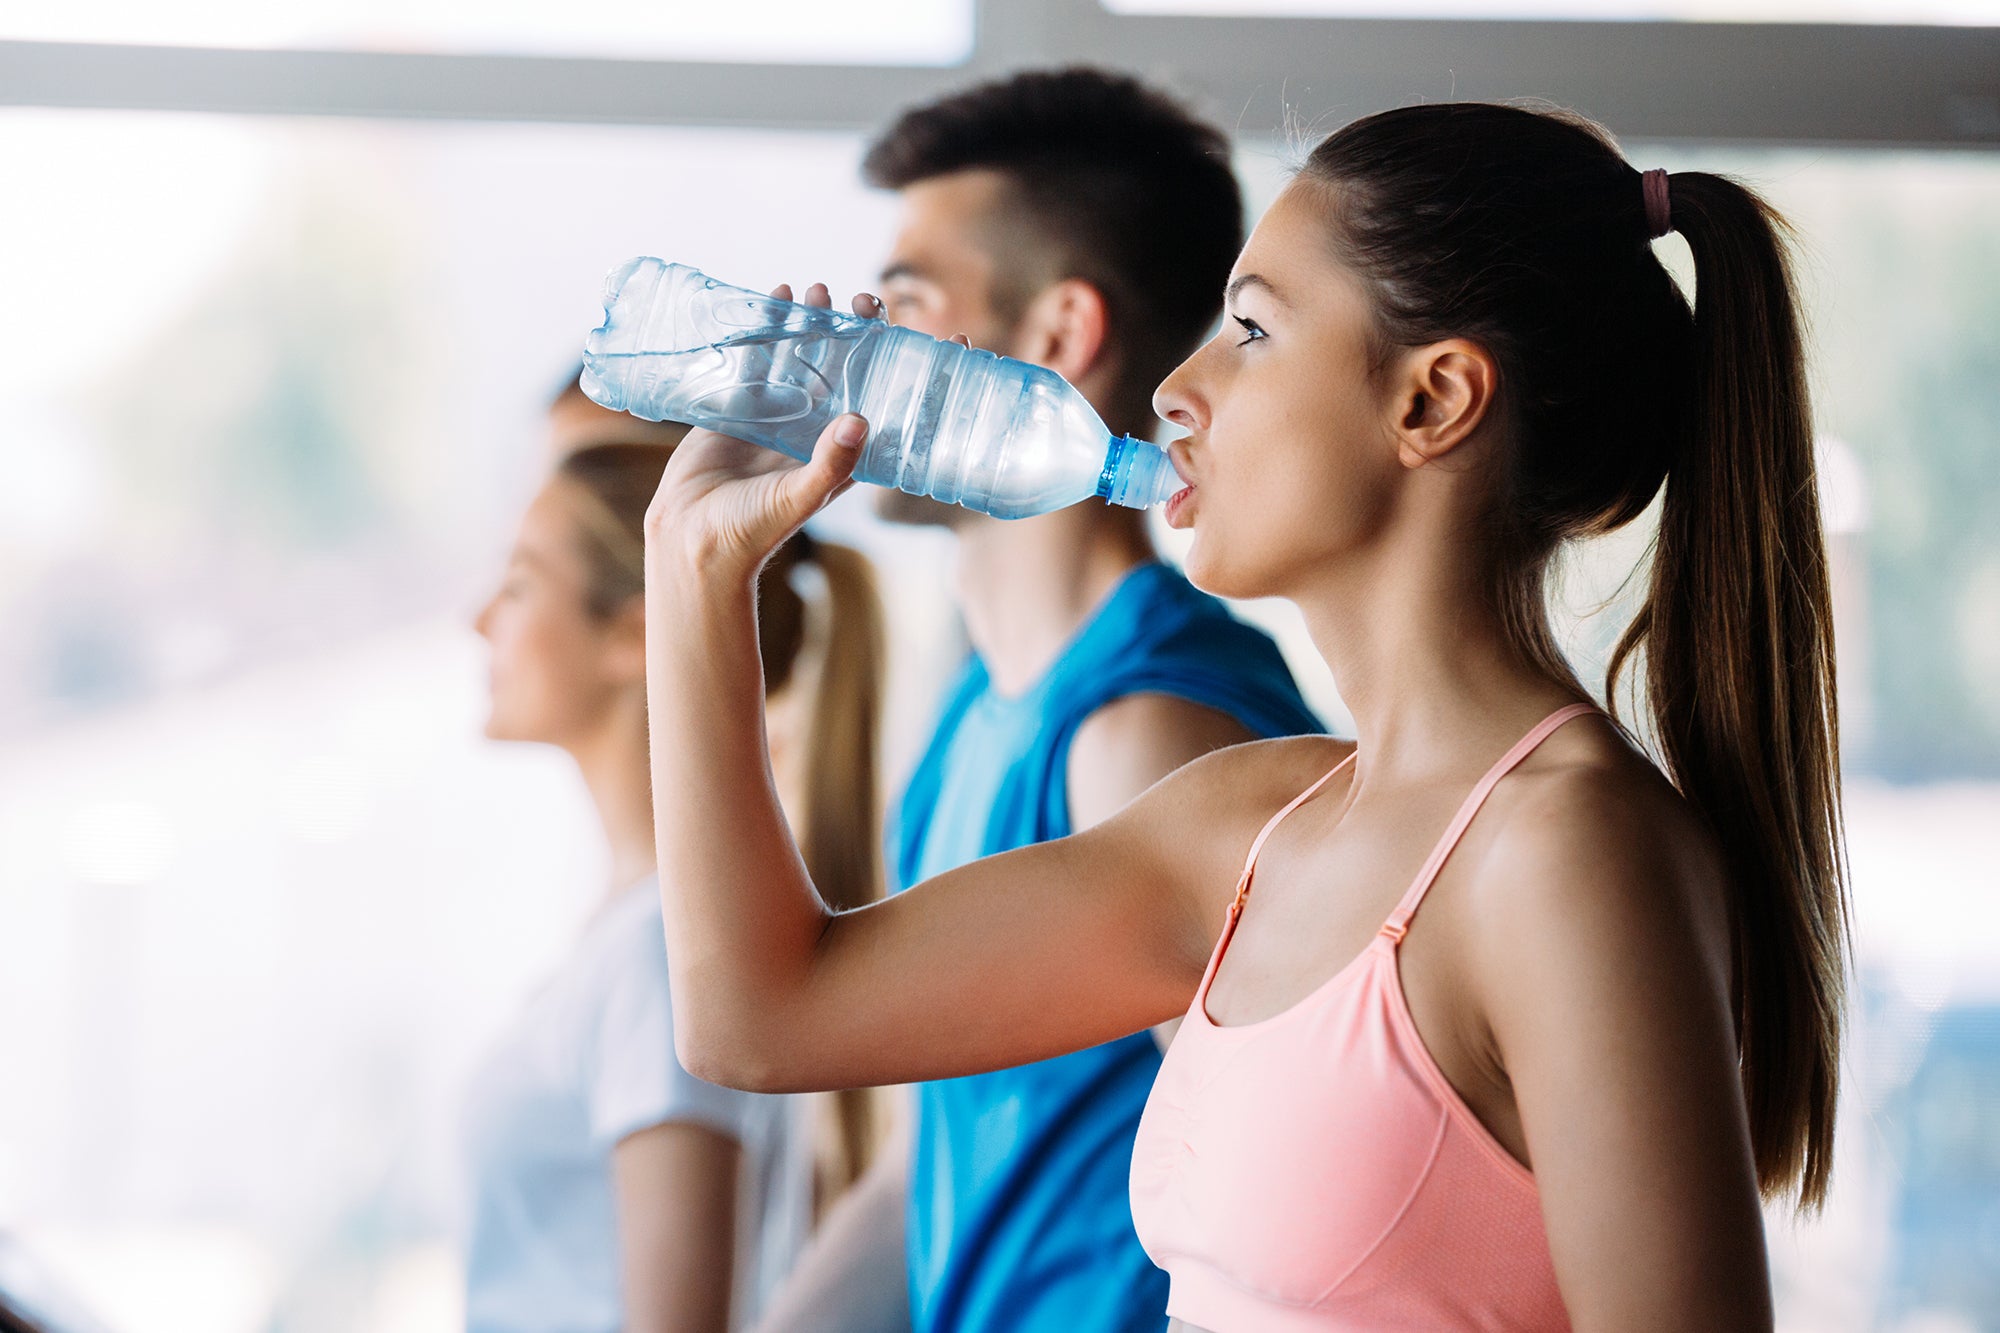 BECOME A HYDRATION NINJA FOR SUMMER WORKOUTS